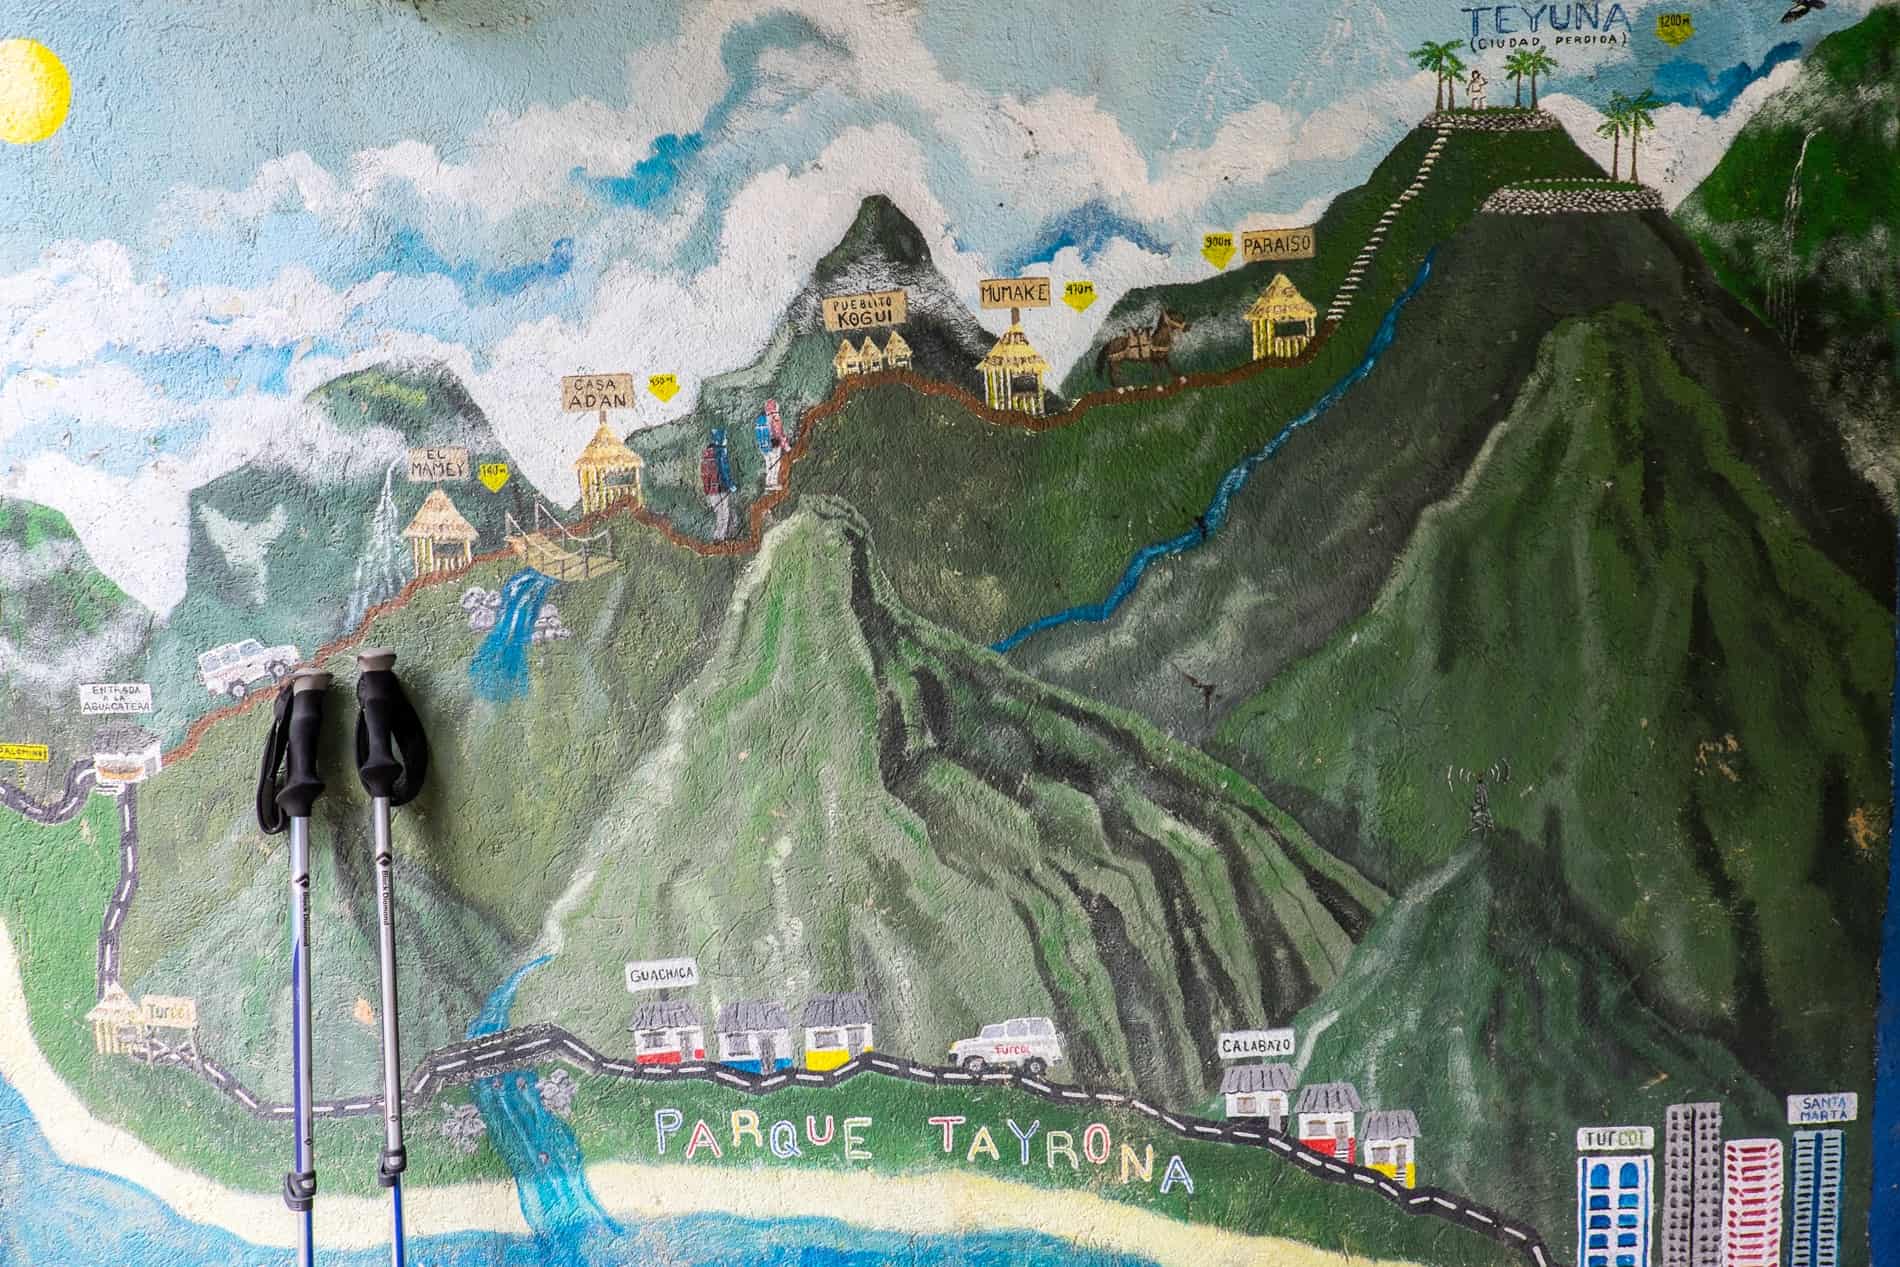 Wall painting of the Sierra Nevada mountain range in Colombia and the Lost City trekking route. 